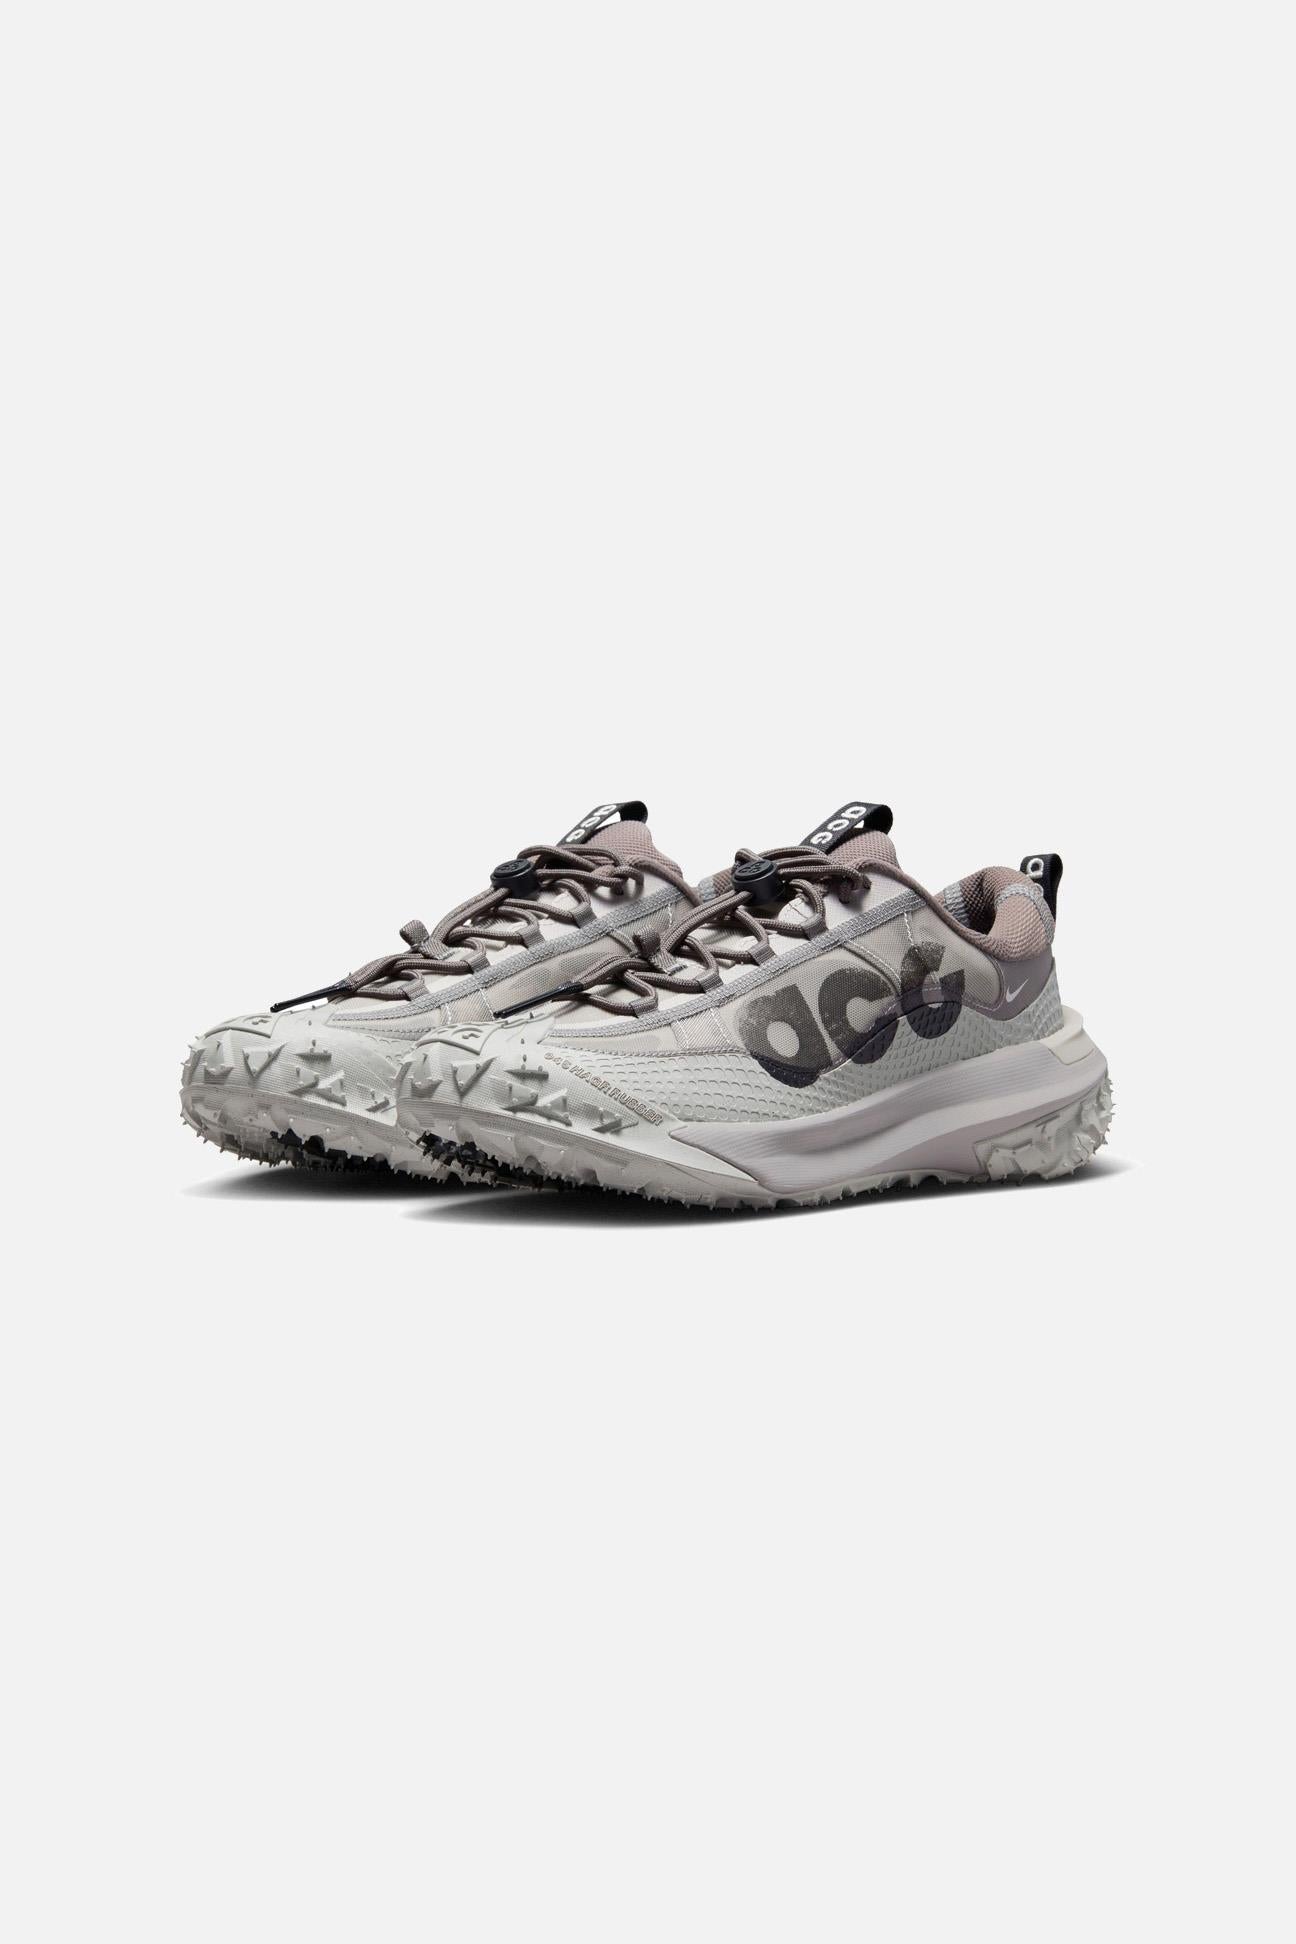  ACG Mountain Fly 2 Low